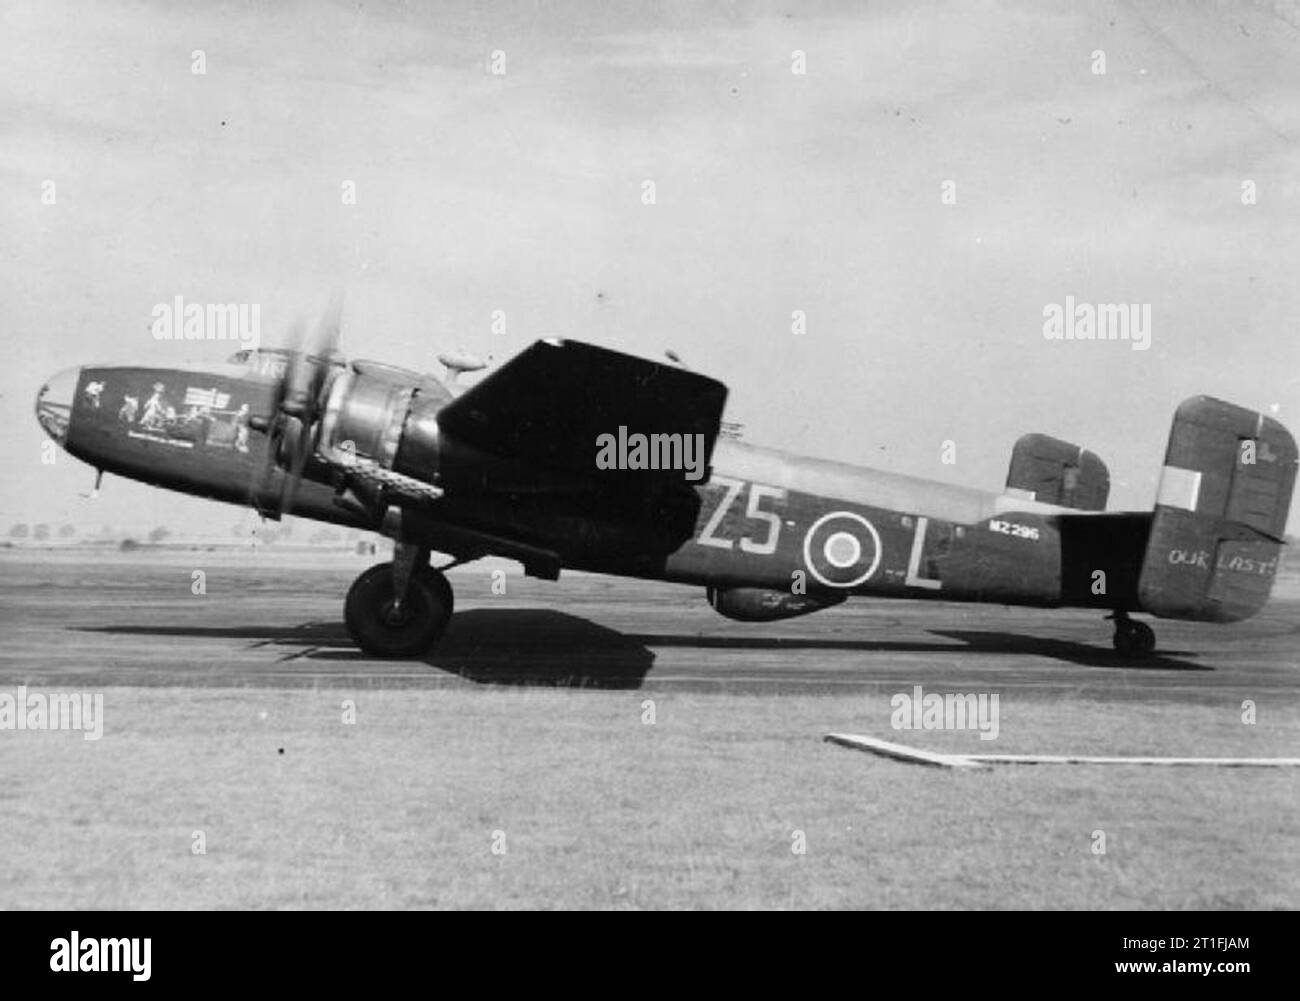 Aircraft of the Royal Air Force 1939-1945- Handley Page Hp.57 Halifax. Halifax B Mark III, MZ296 ?Z5-L?, of No 462 Squadron RAAF, about to take off from Driffield, Yorkshire, on the crew?s last operation of their tour, (note the chalked message on the tail fin). The aircraft was lost near Brussels the following month while flown by a different crew. Stock Photo